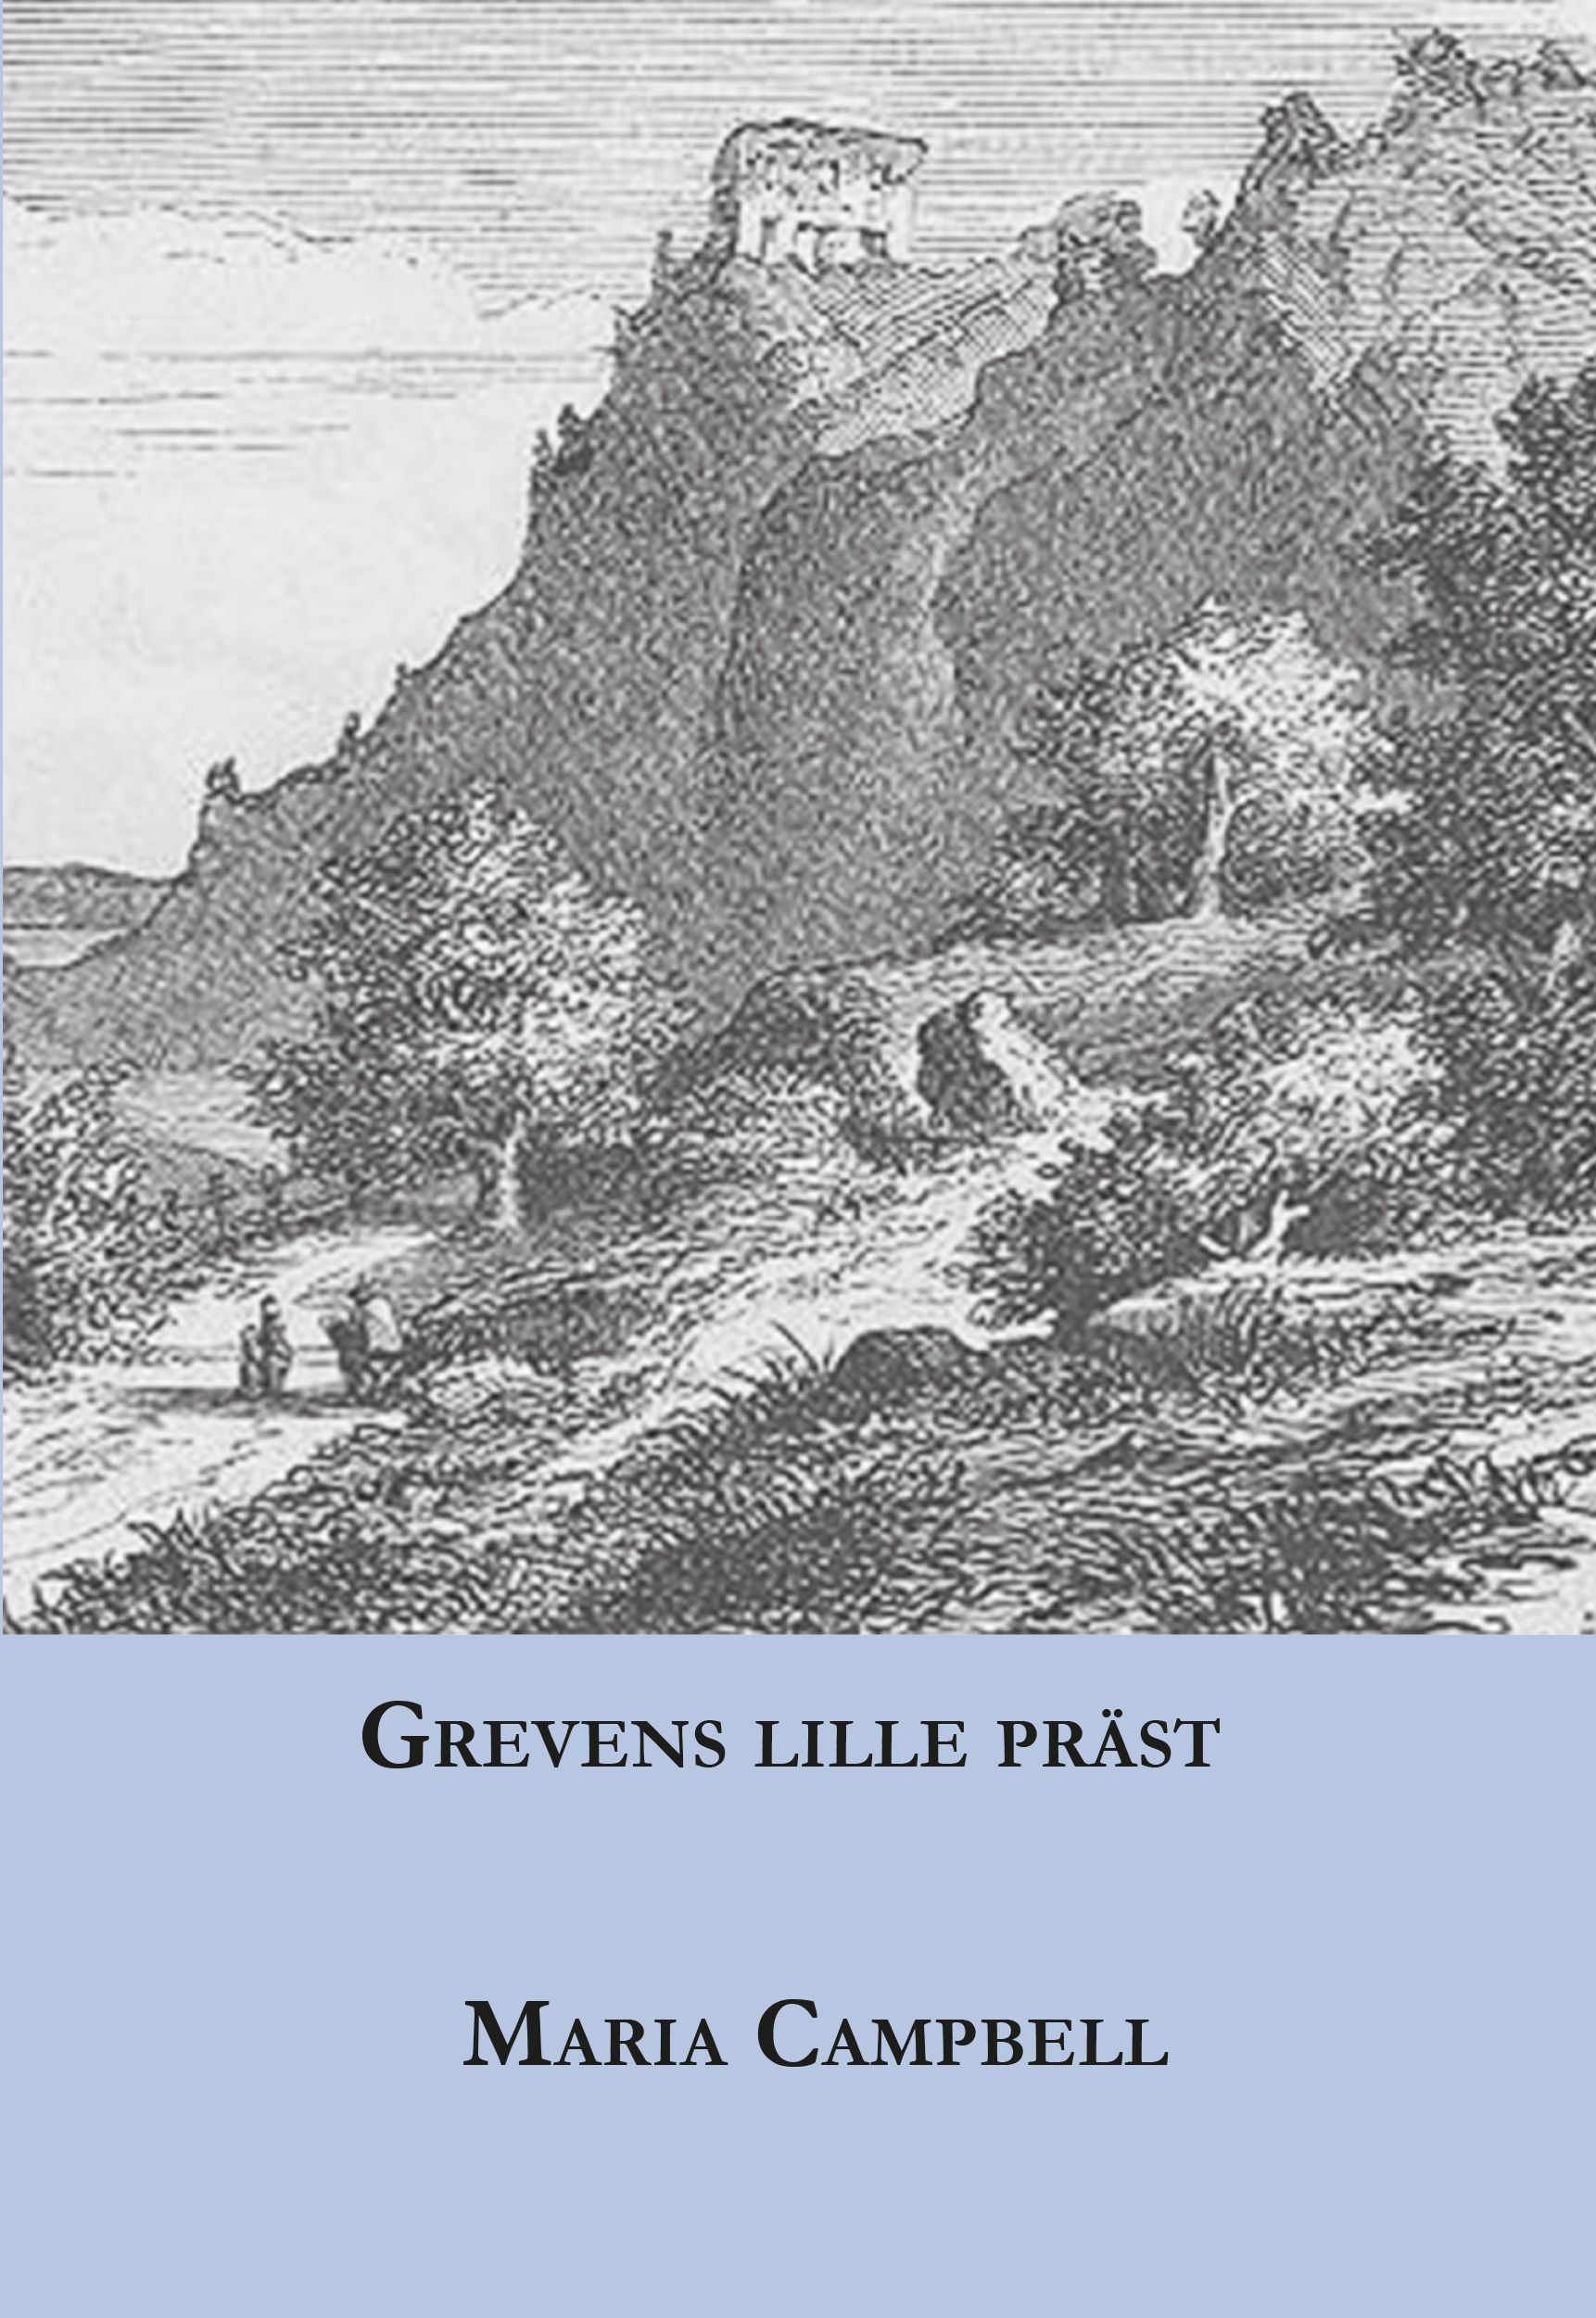 Grevens lille präst, eBook by Maria Campbell